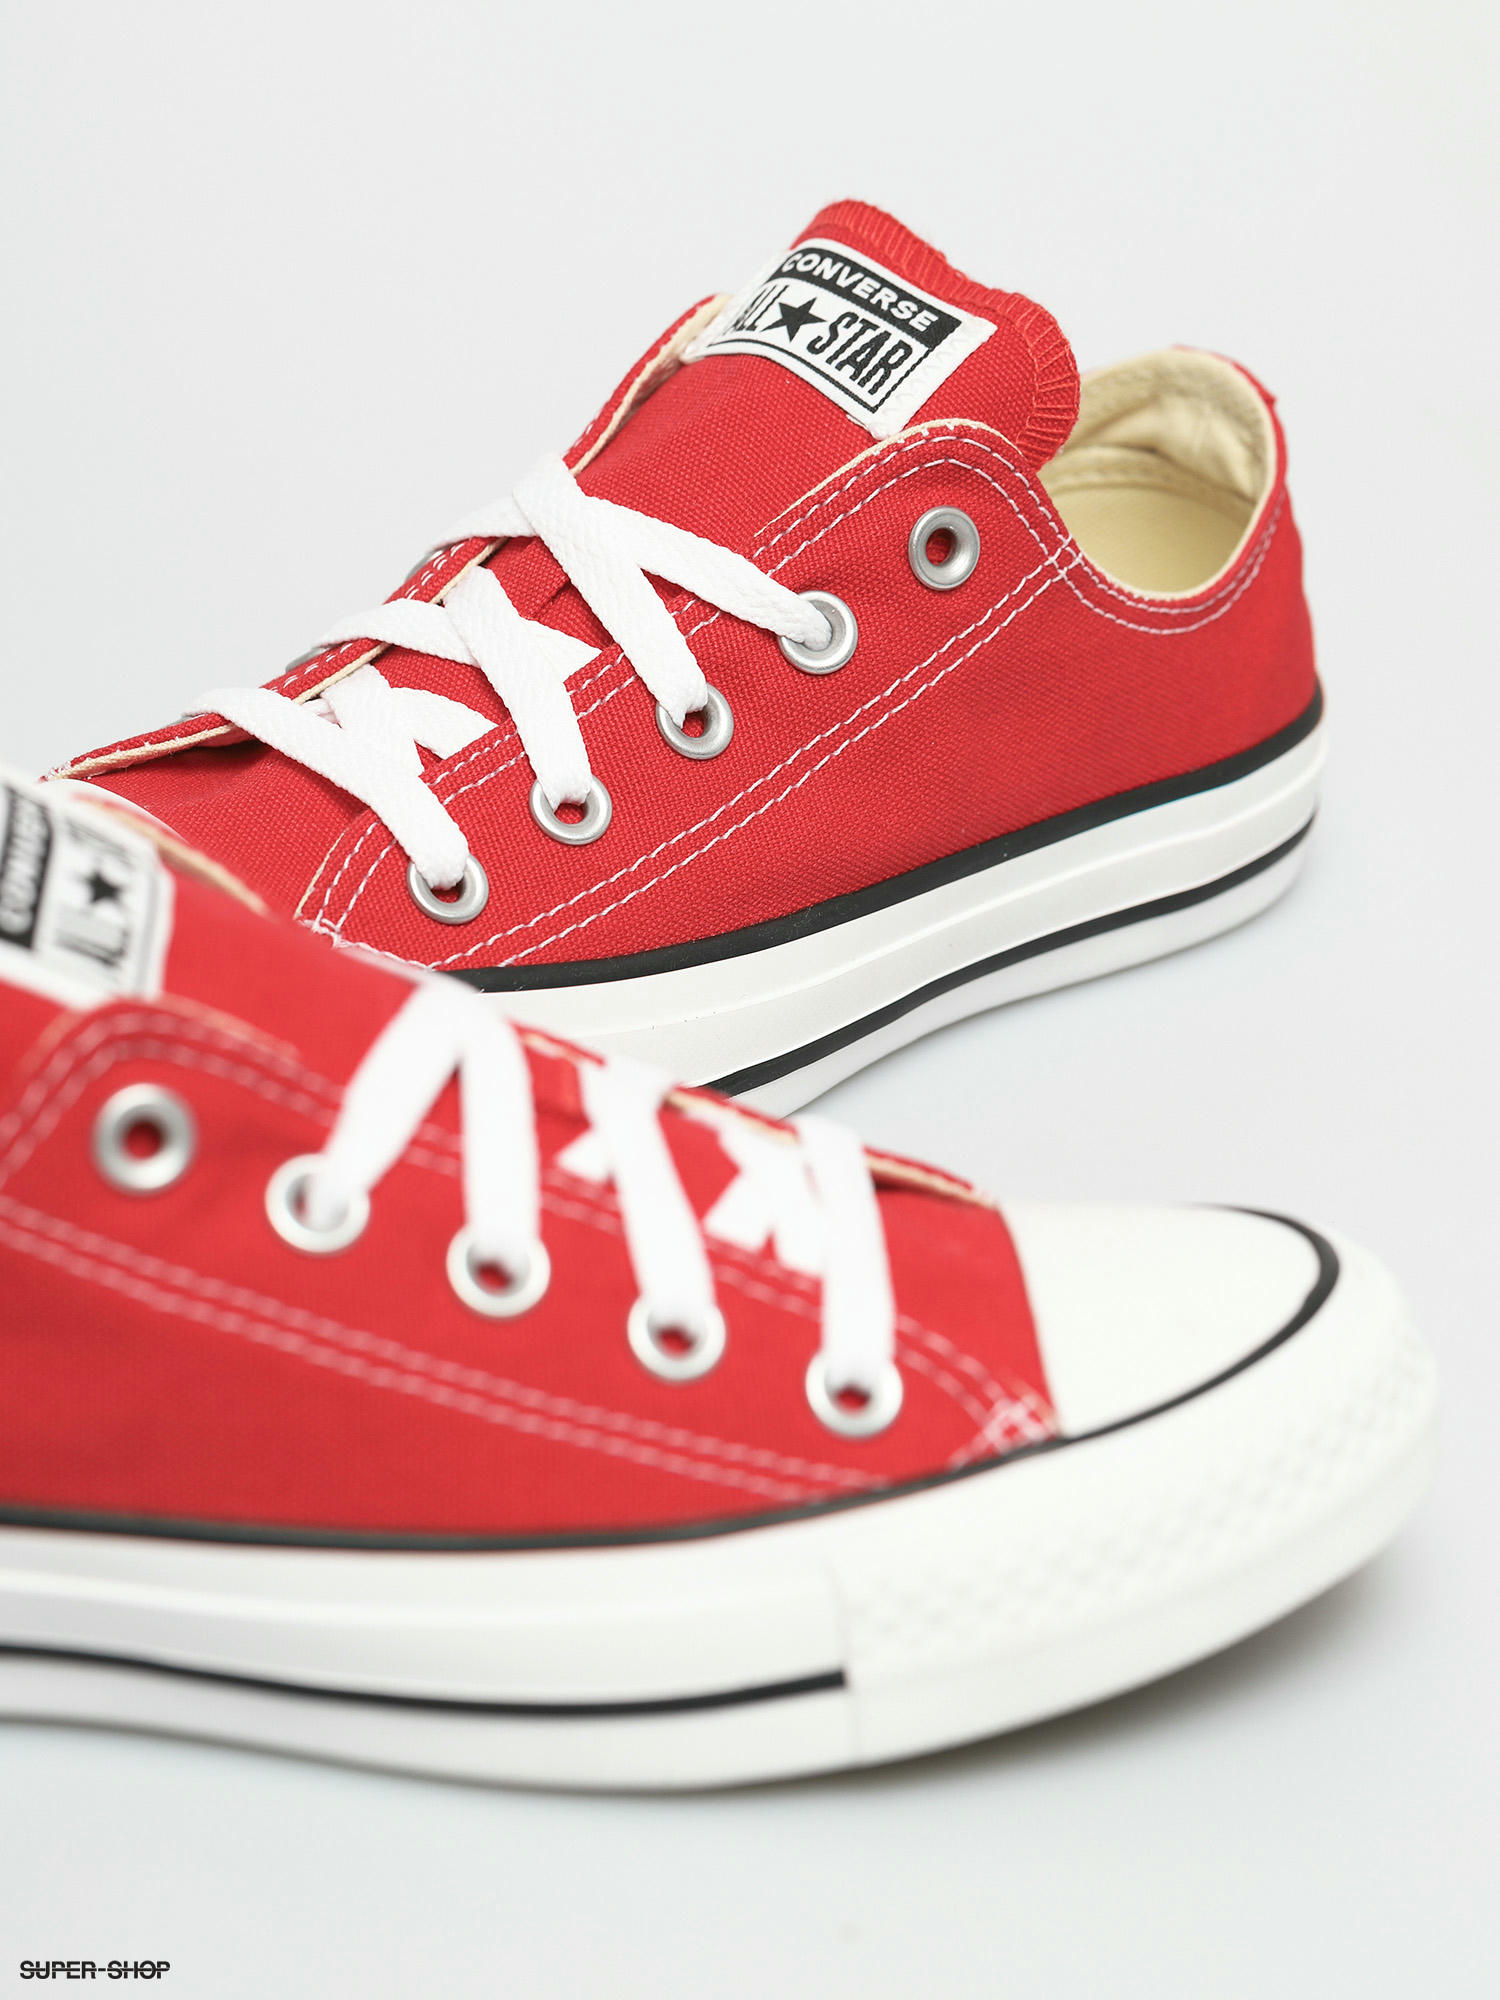 converse chuck taylor ox red